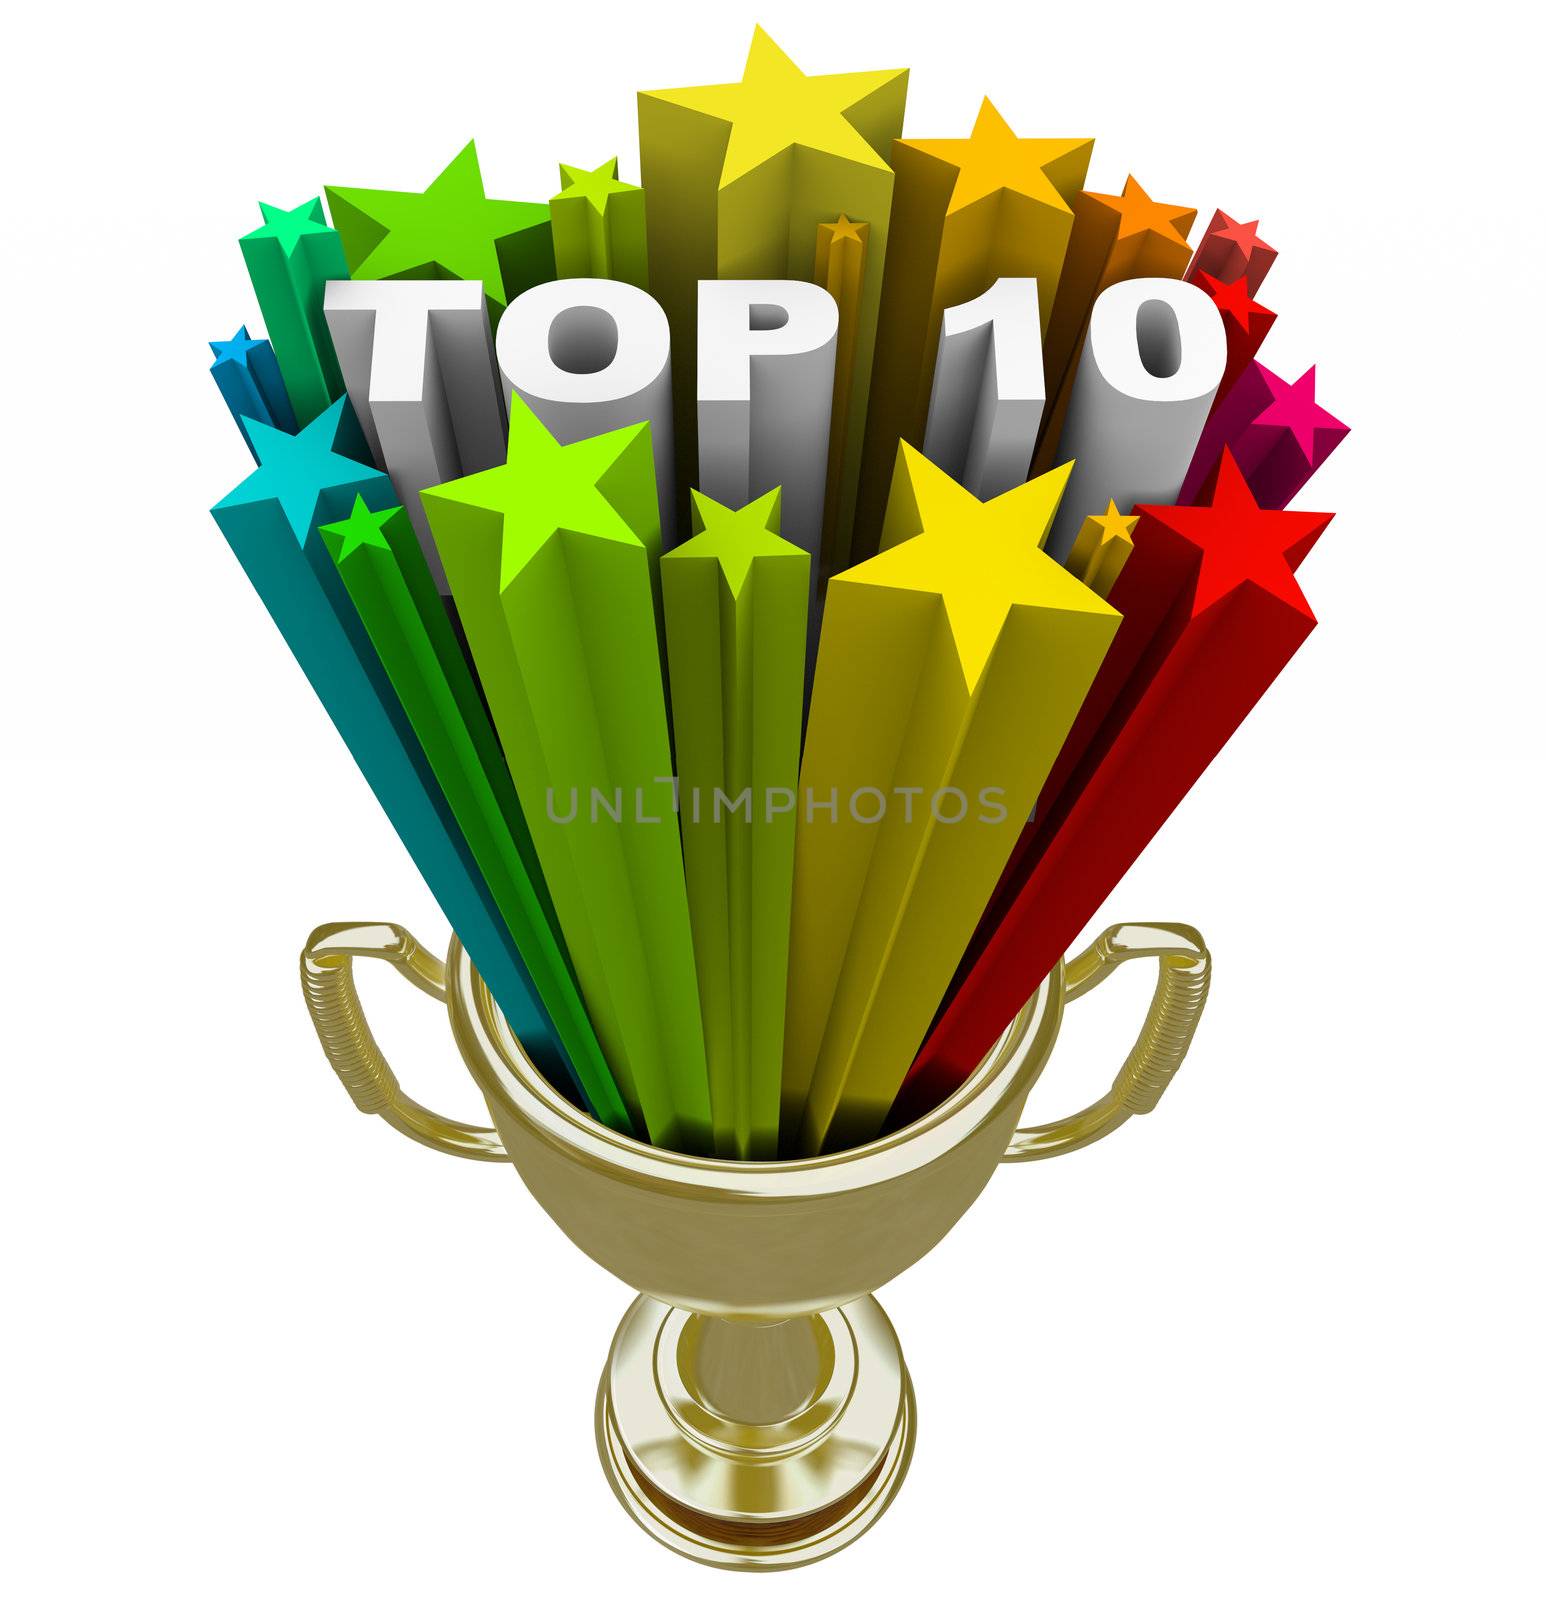 Top Ten Ranking List Showing Best Choices and Quality by iQoncept